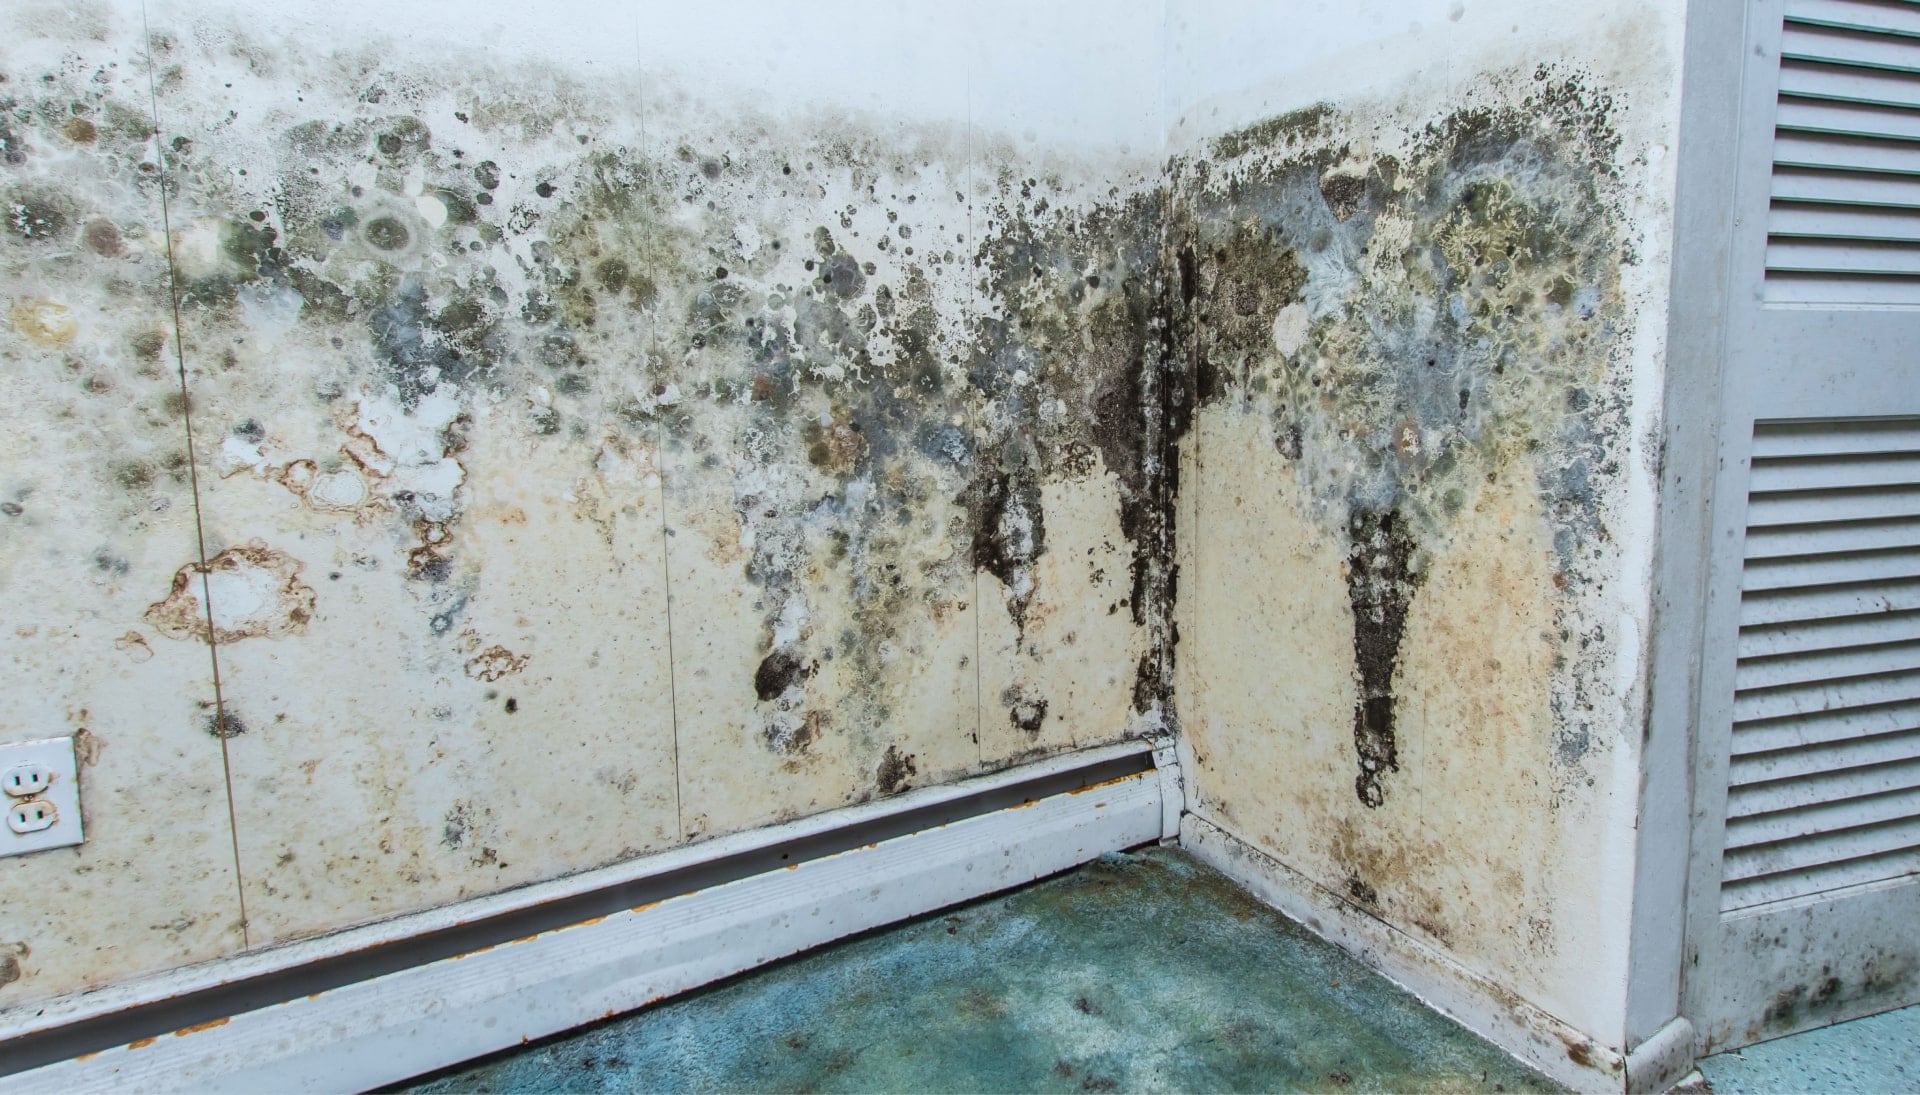 A mold remediation team using specialized techniques to remove mold damage and control odors in a Lafayette property, with a focus on safety and efficiency